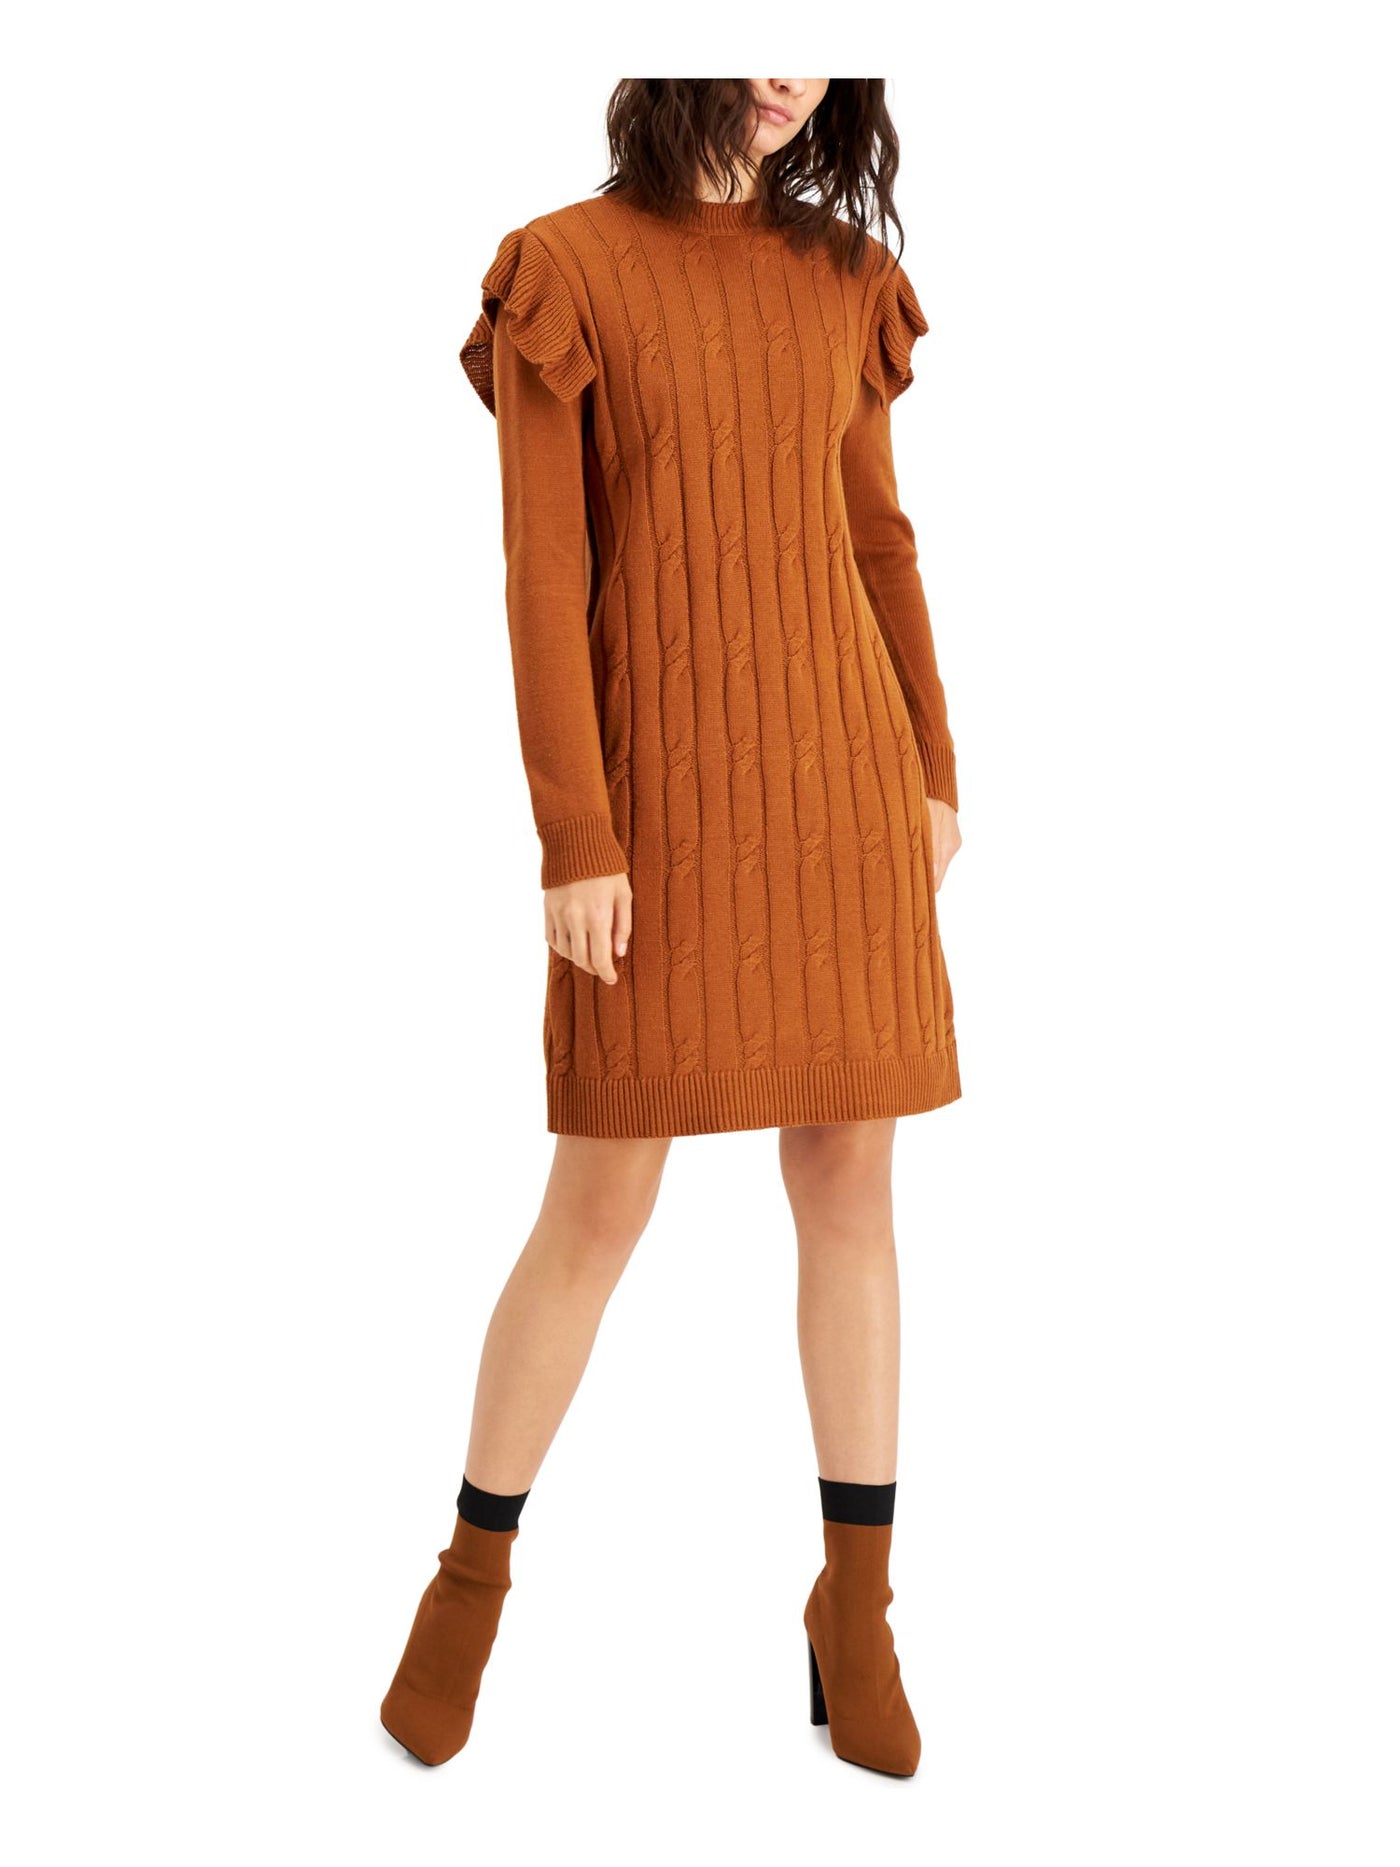 BAR III DRESSES Womens Brown Ruffled Cable-knit Front Long Sleeve Crew Neck Above The Knee Sweater Dress XL